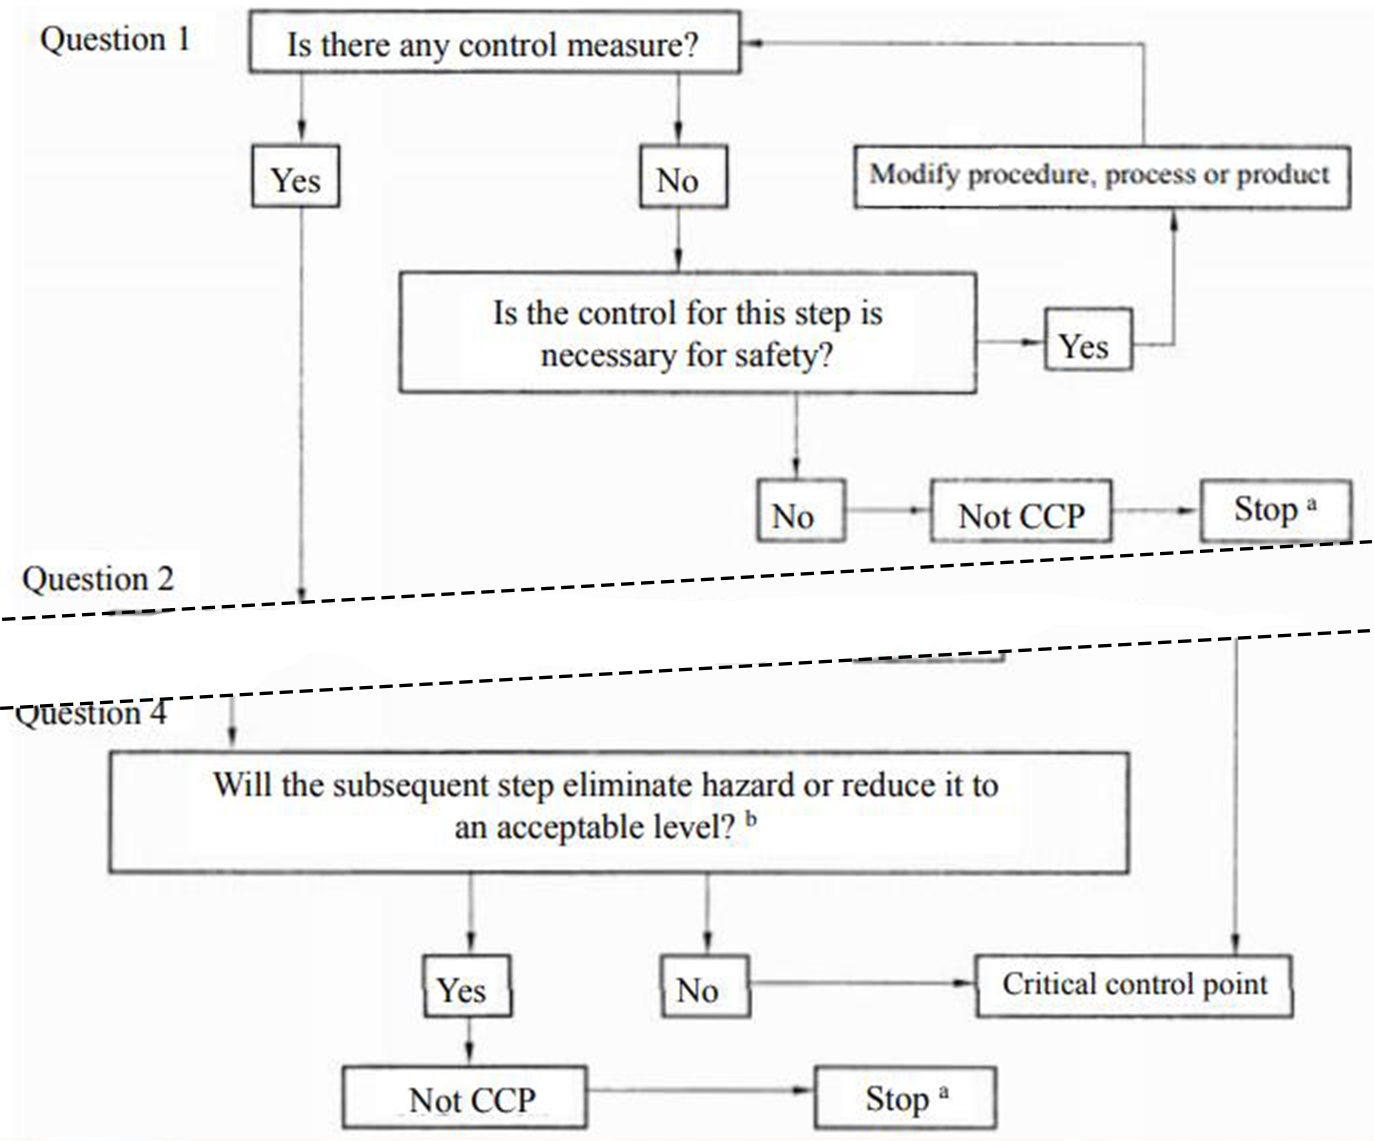 Hazard Analysis and Critical Control Point (HACCP) System and Guidelines for Its Application-4, Chinese food standard and regulation, Example of a decision tree for the definition of Critical Control Points (CCPs)